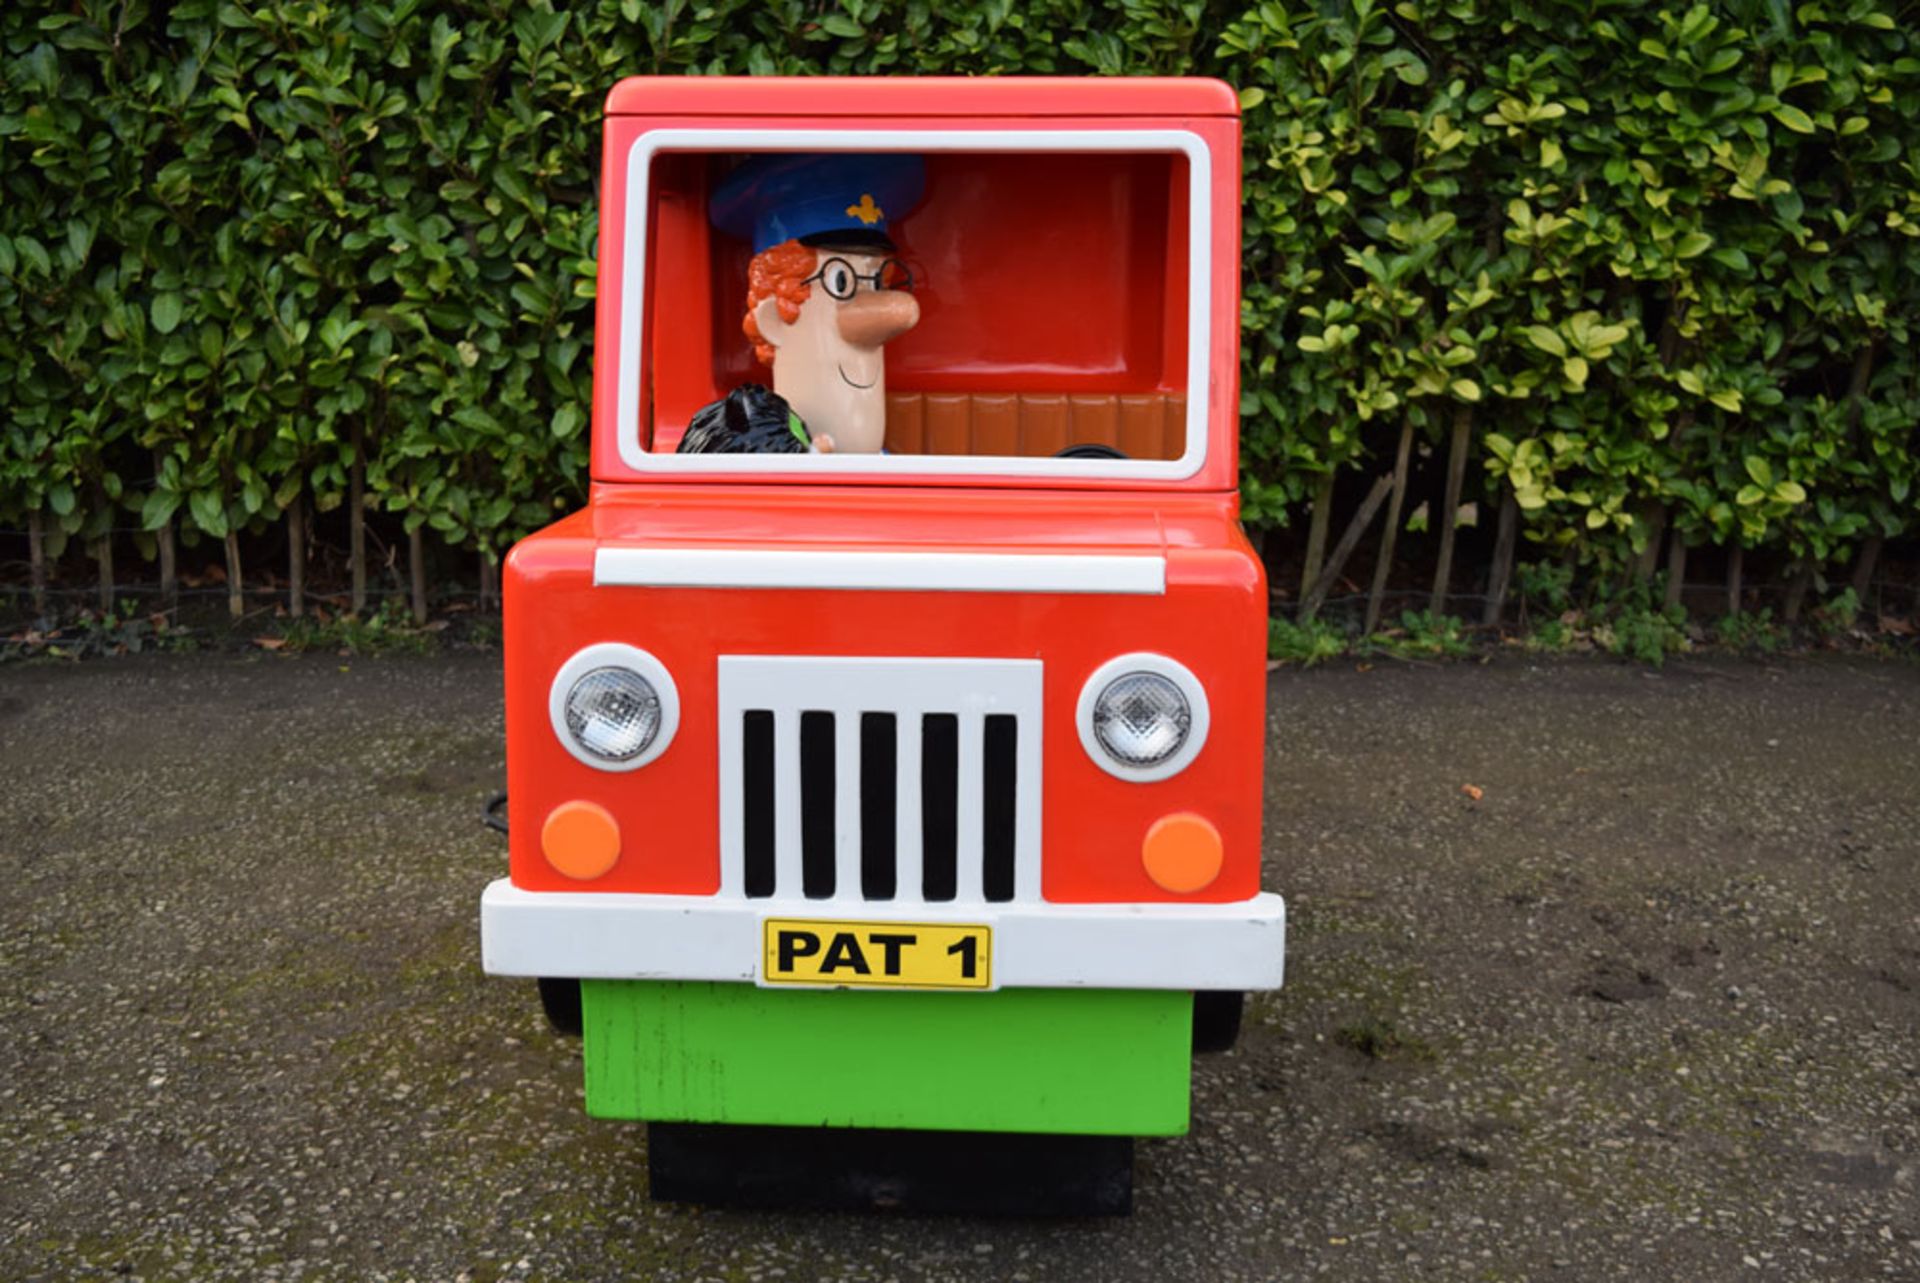 Postman Pat Child's Coin Operated Ride On Arcade Machine. - Image 3 of 3